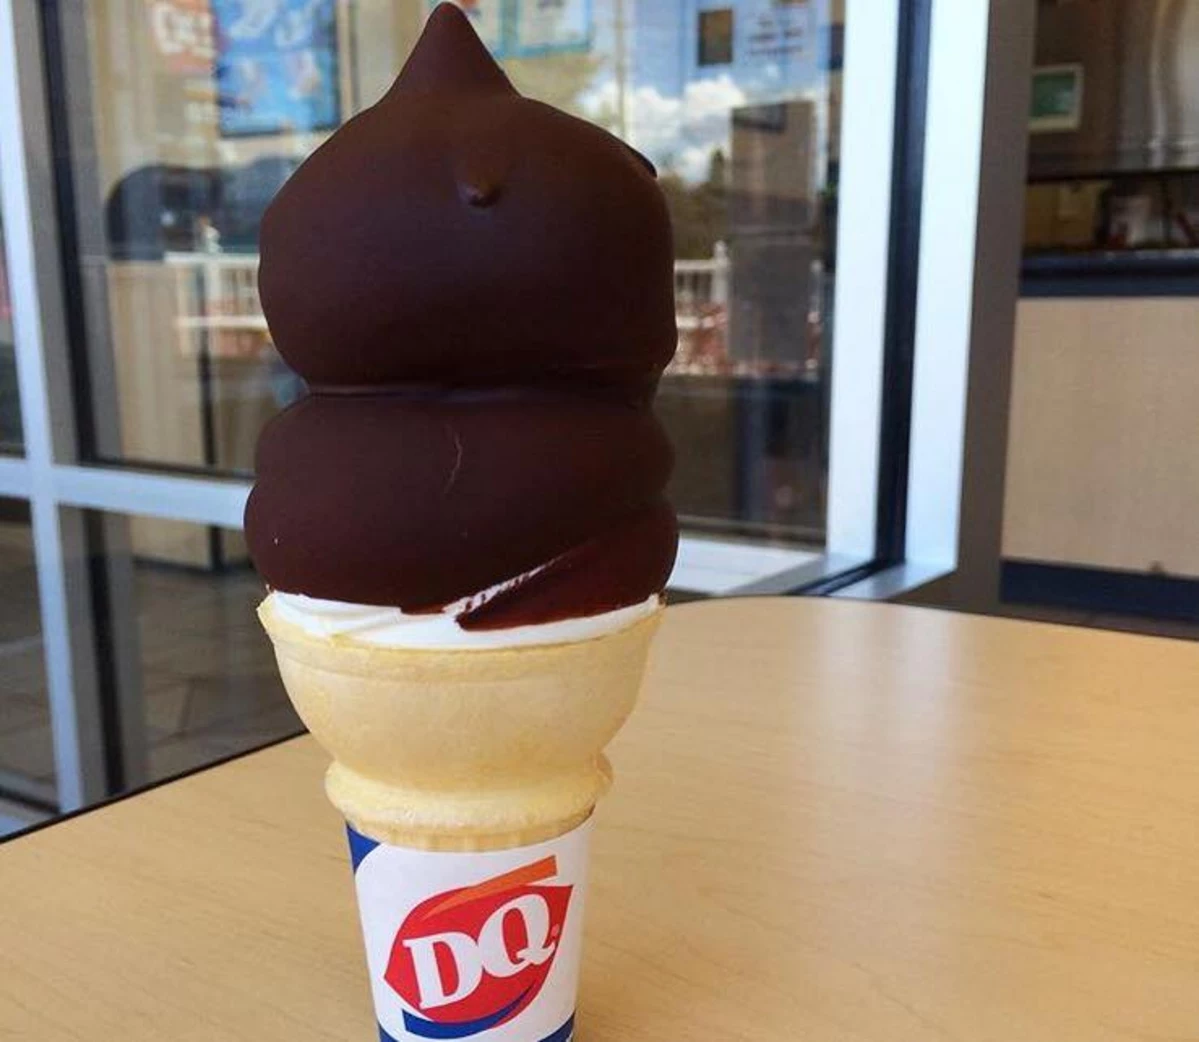 Celebrate the First Day of Spring With Free Ice Cream at Dairy Queen